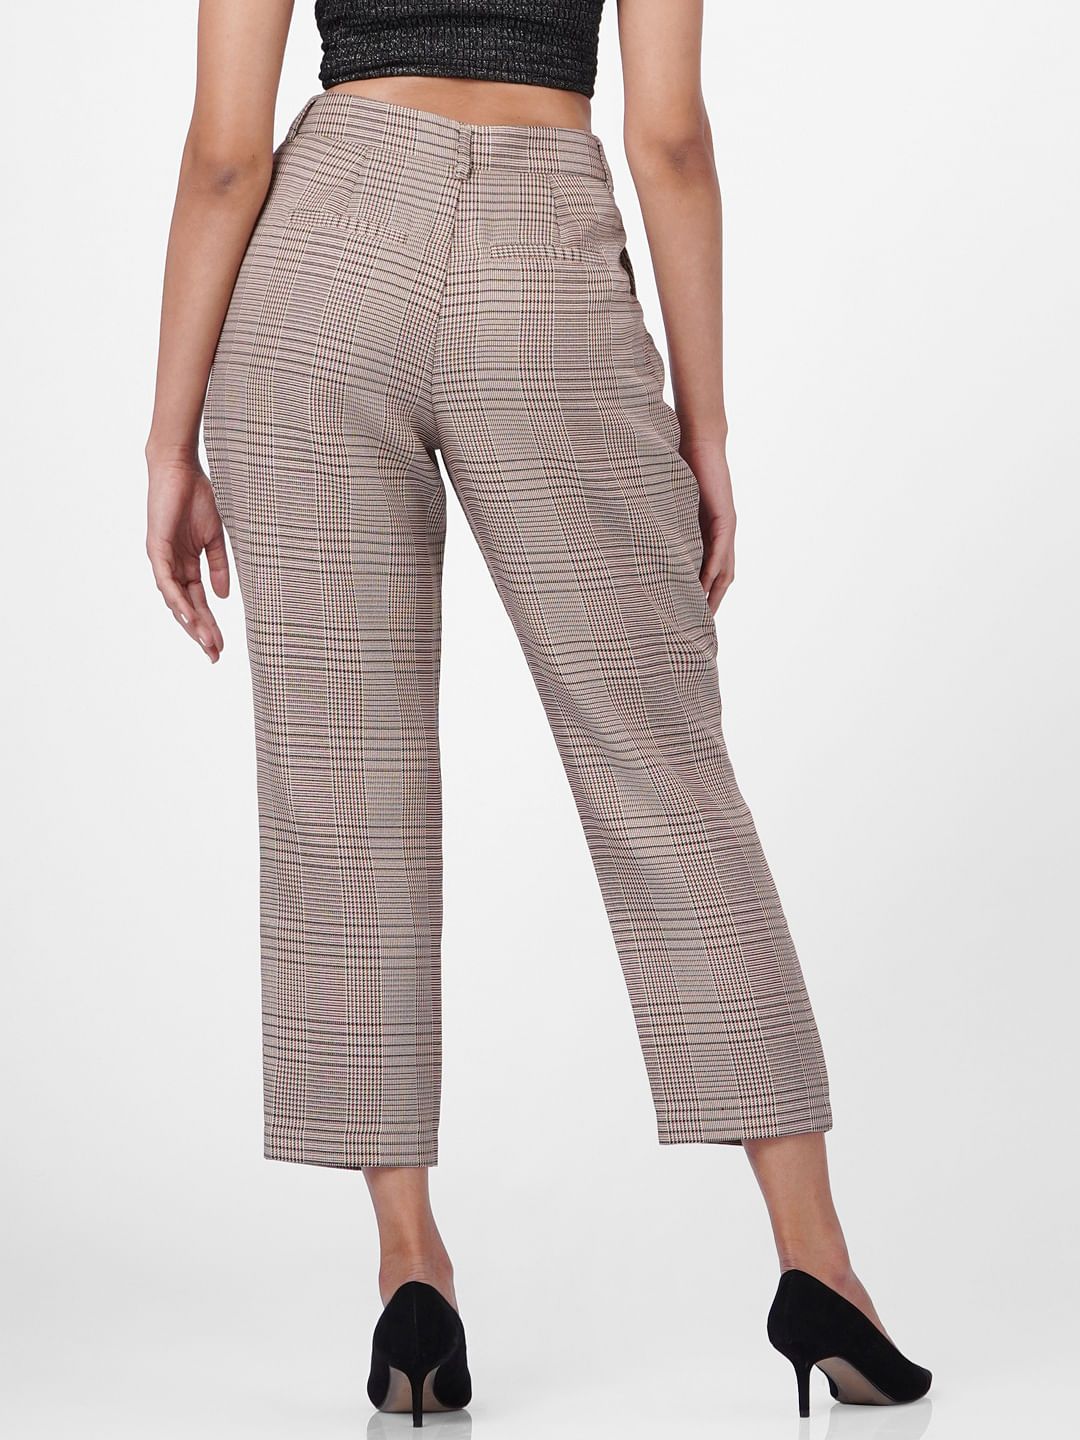 Cotton Mens Checkered Trousers Pattern  Checked Occasion  Casual Wear  Formal Wear at Rs 600  Piece in Bharatpur